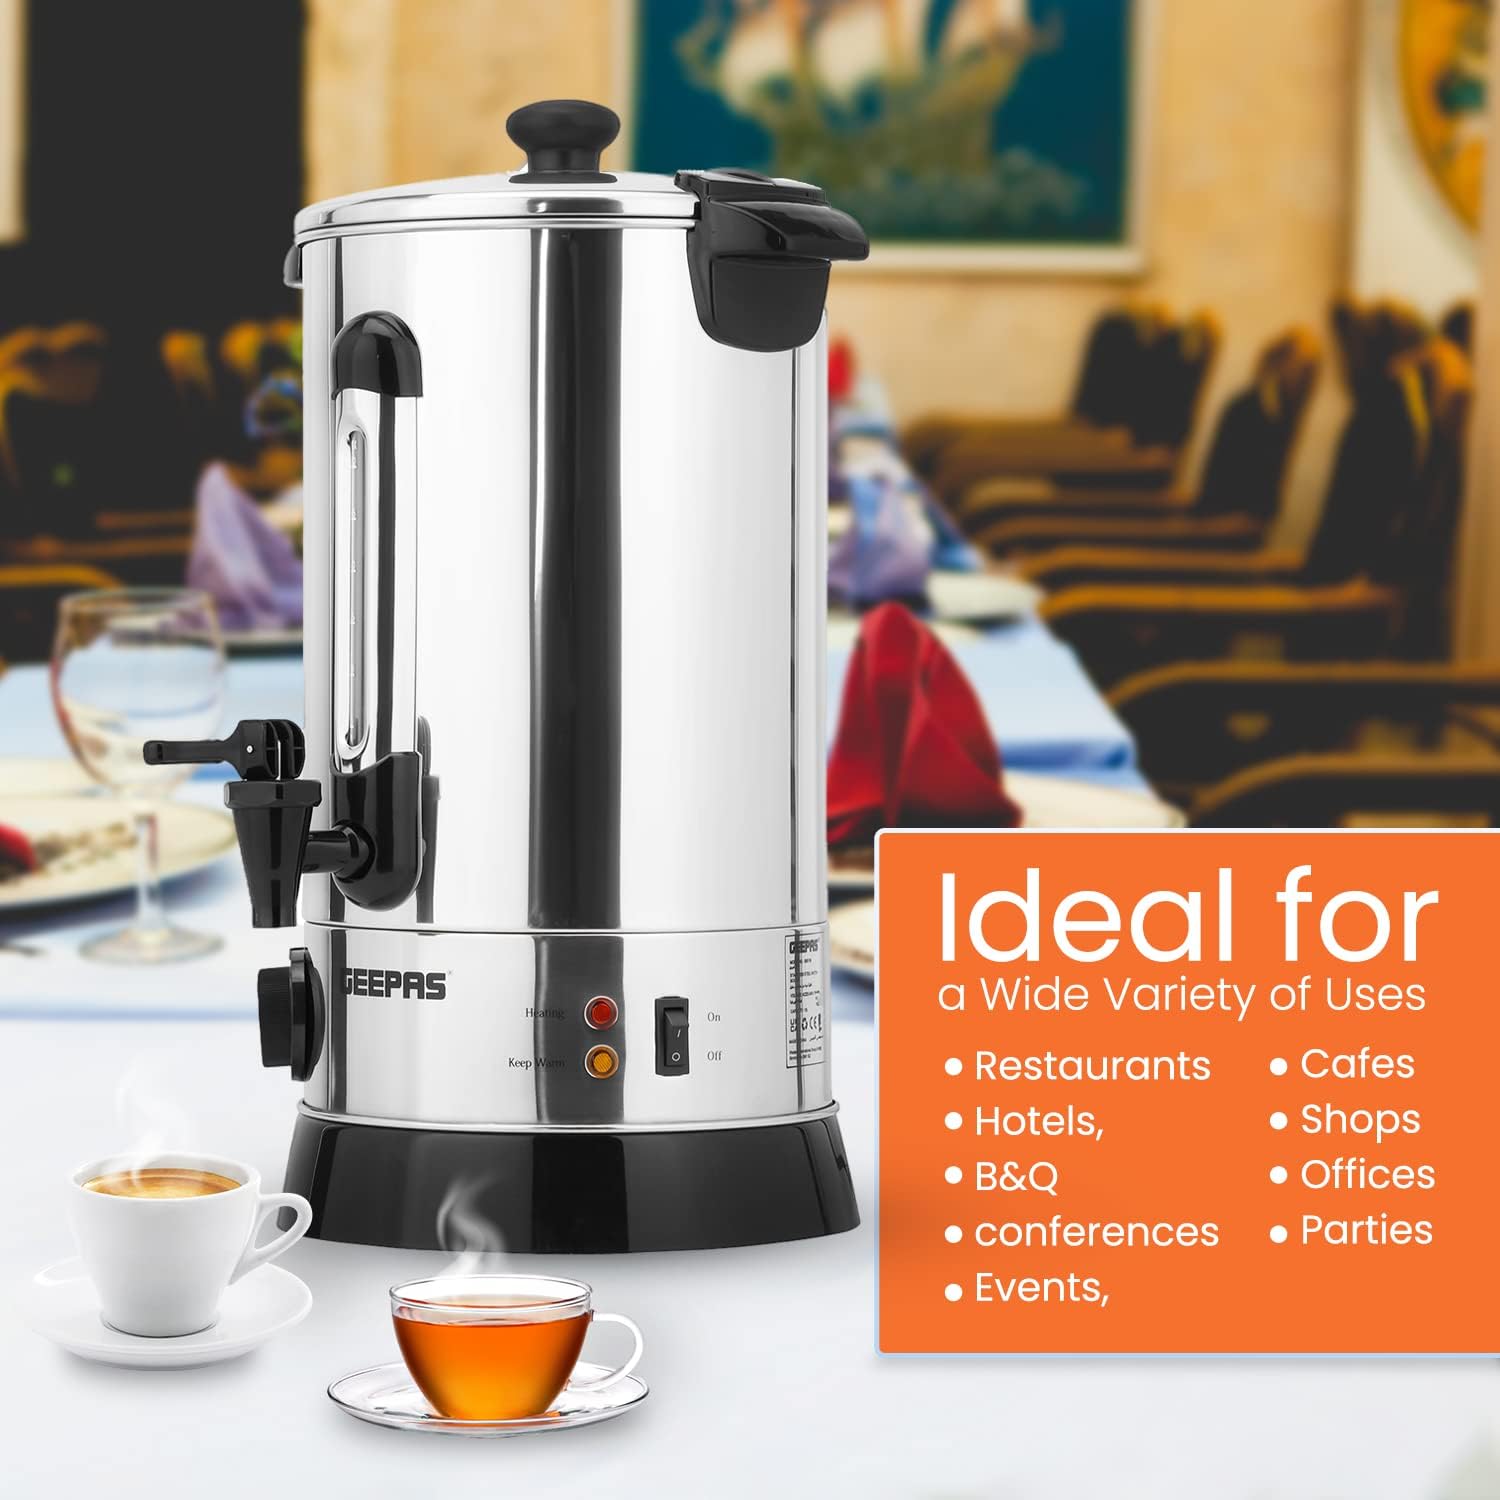 Geepas Electric Catering Urn, 950W Instant Hot Water Boiler Dispenser - Tea Urn Kettle Home Brewing Commercial or Office Use with Keep Warm- Easy Pour Tap,...